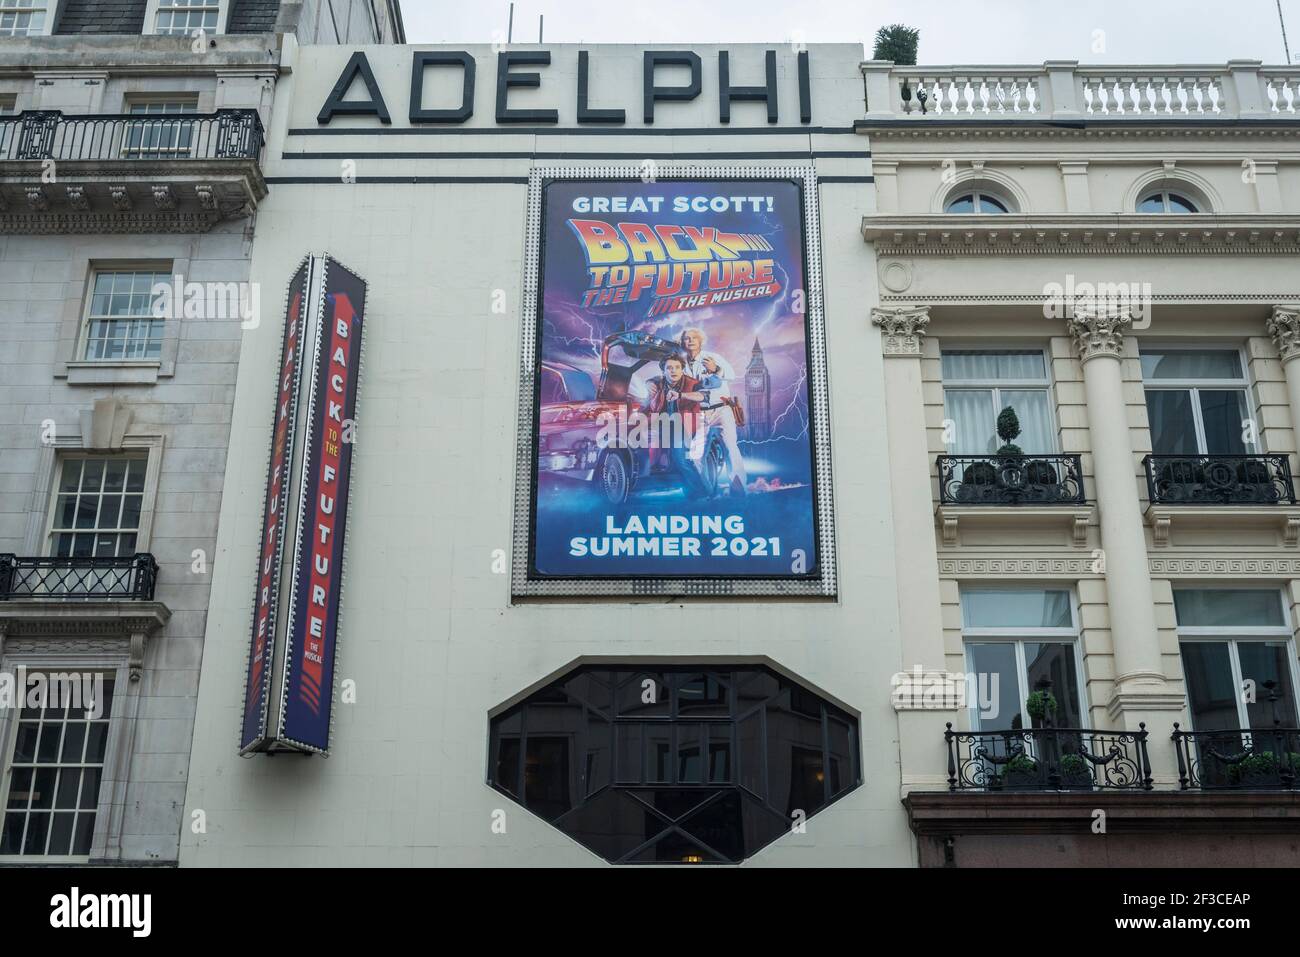 London, UK. 16 March 2021. Exterior signage promoting “Back To The Future –  the musical” at the Adelphi Theatre on The Strand, which is due to arrive  Summer 2021. The West End